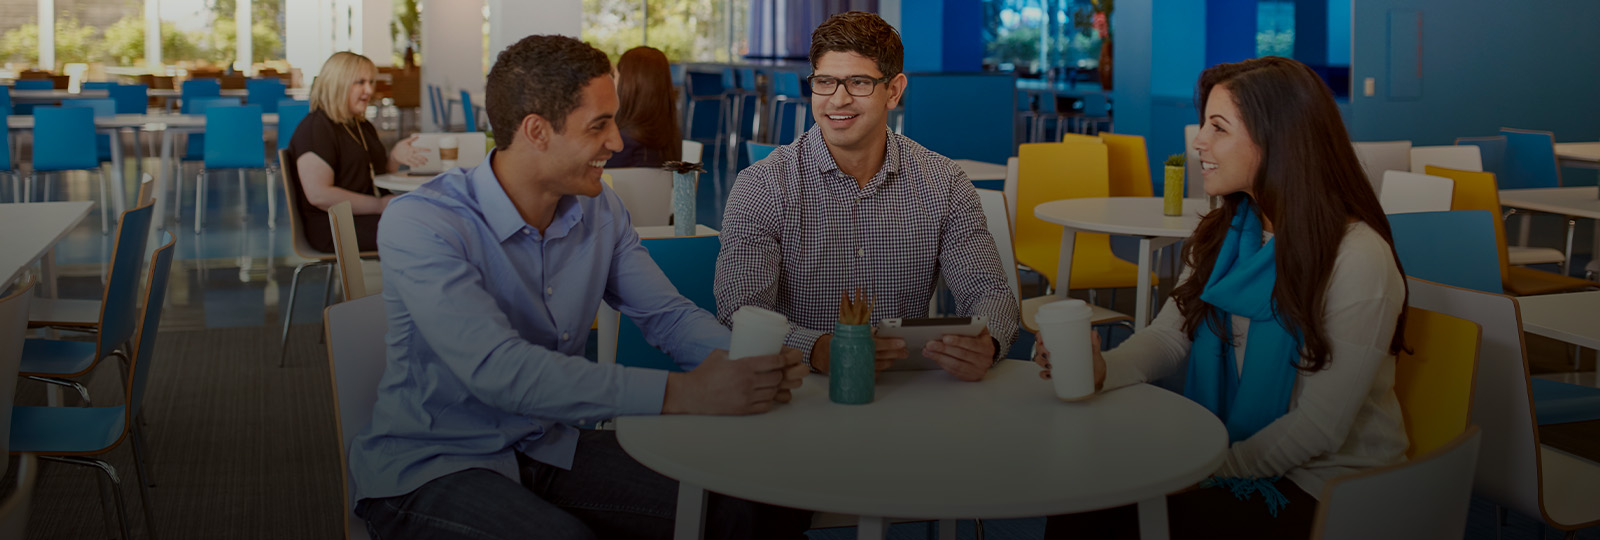 Three employees sitting at a table drinking coffee and using a tablet, with smiles on their face.